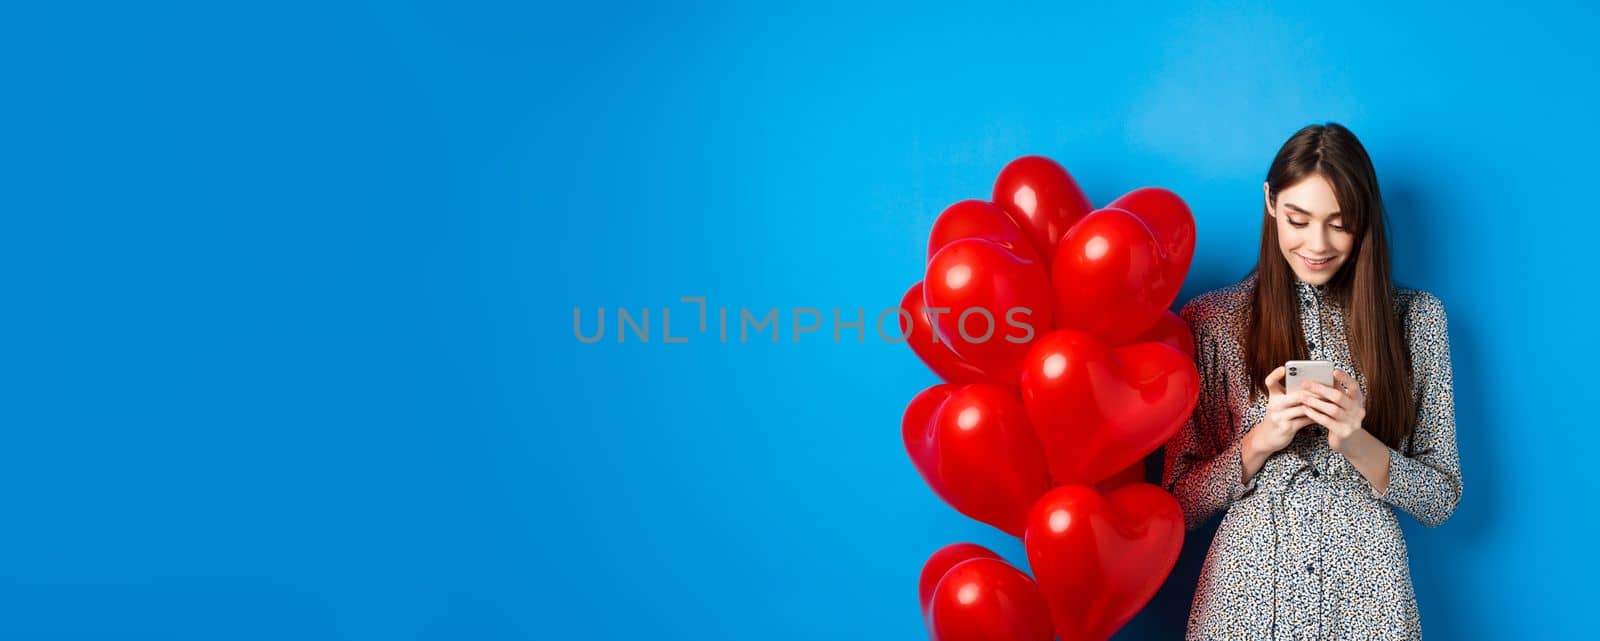 Valentines day. Smiling woman in dress standing near red hearts balloons and looking at smartphone, standing on blue background.